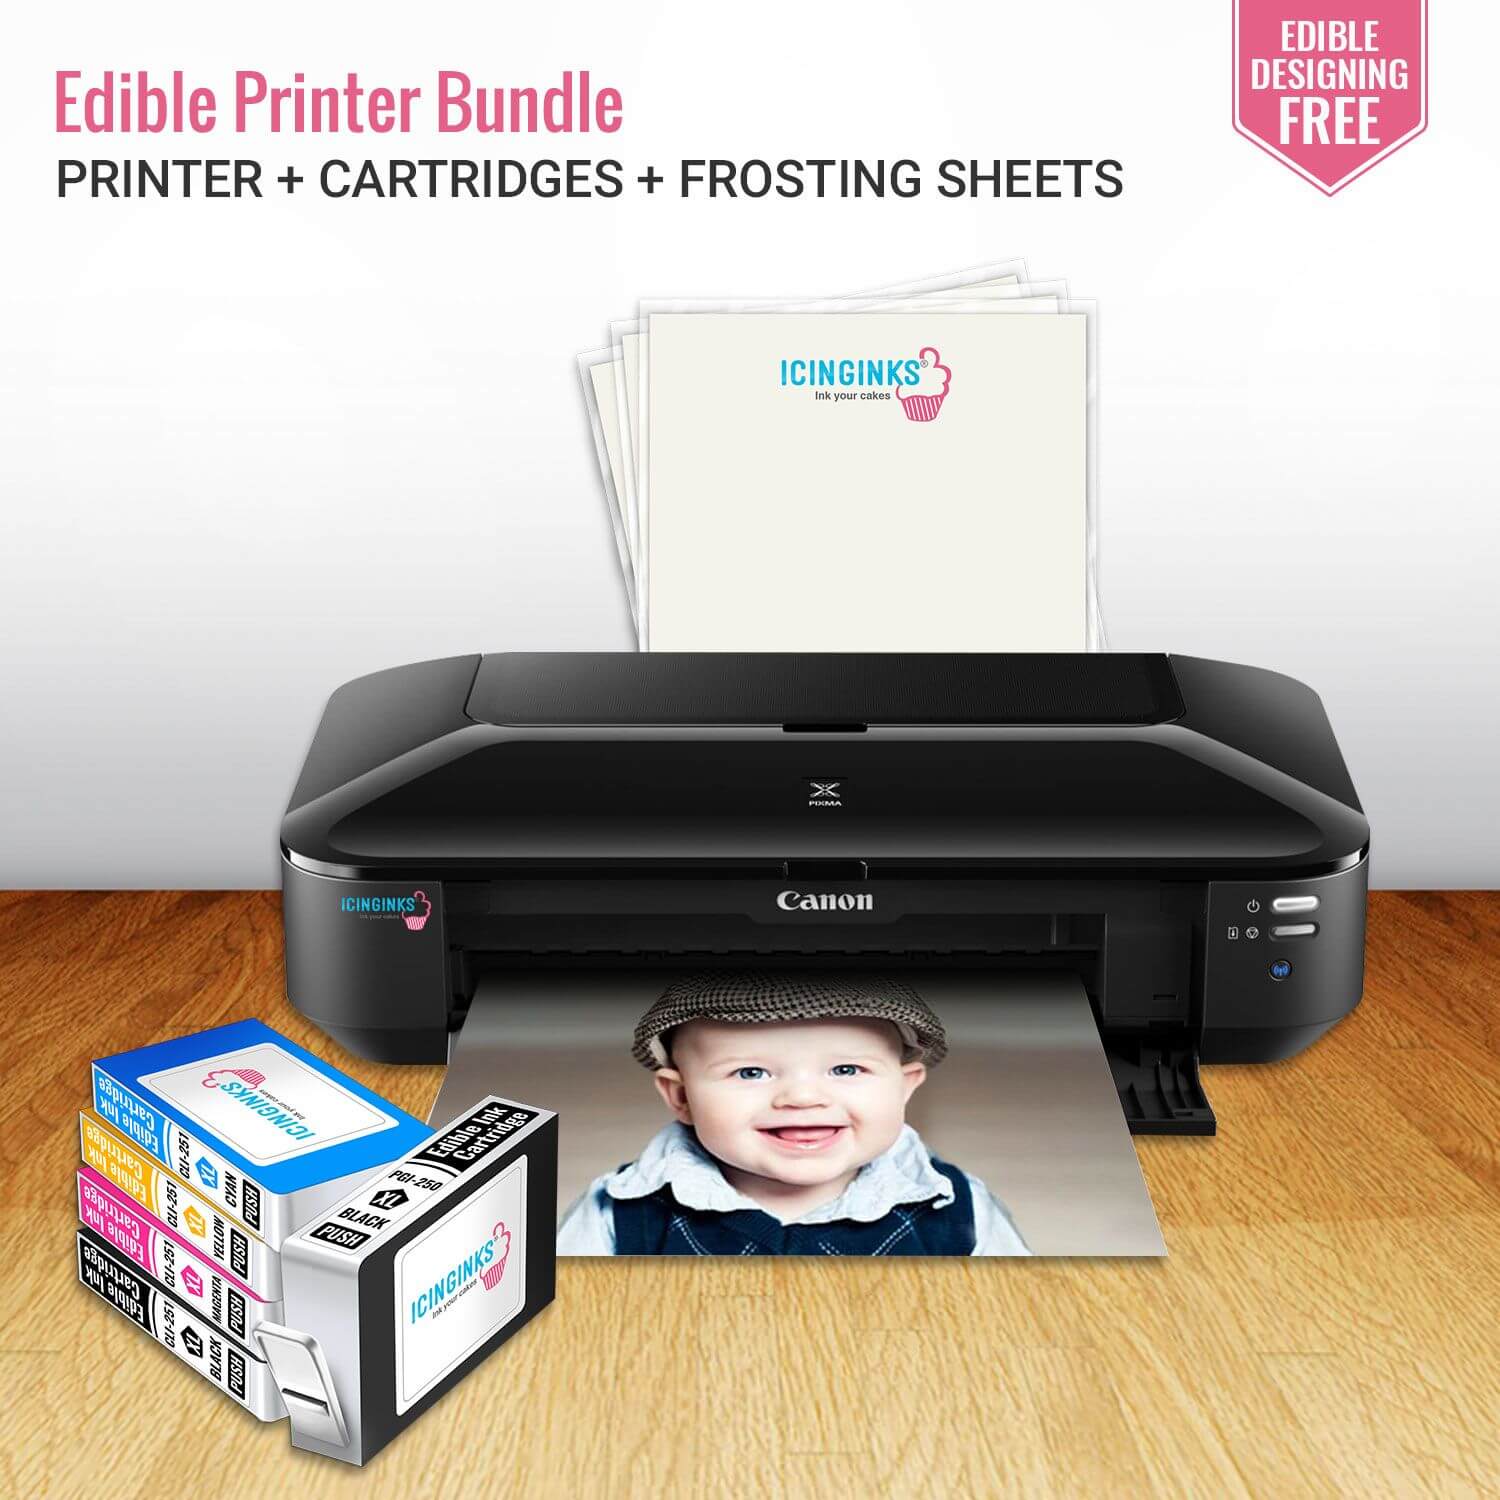 9+ Best Printer For Edible Images